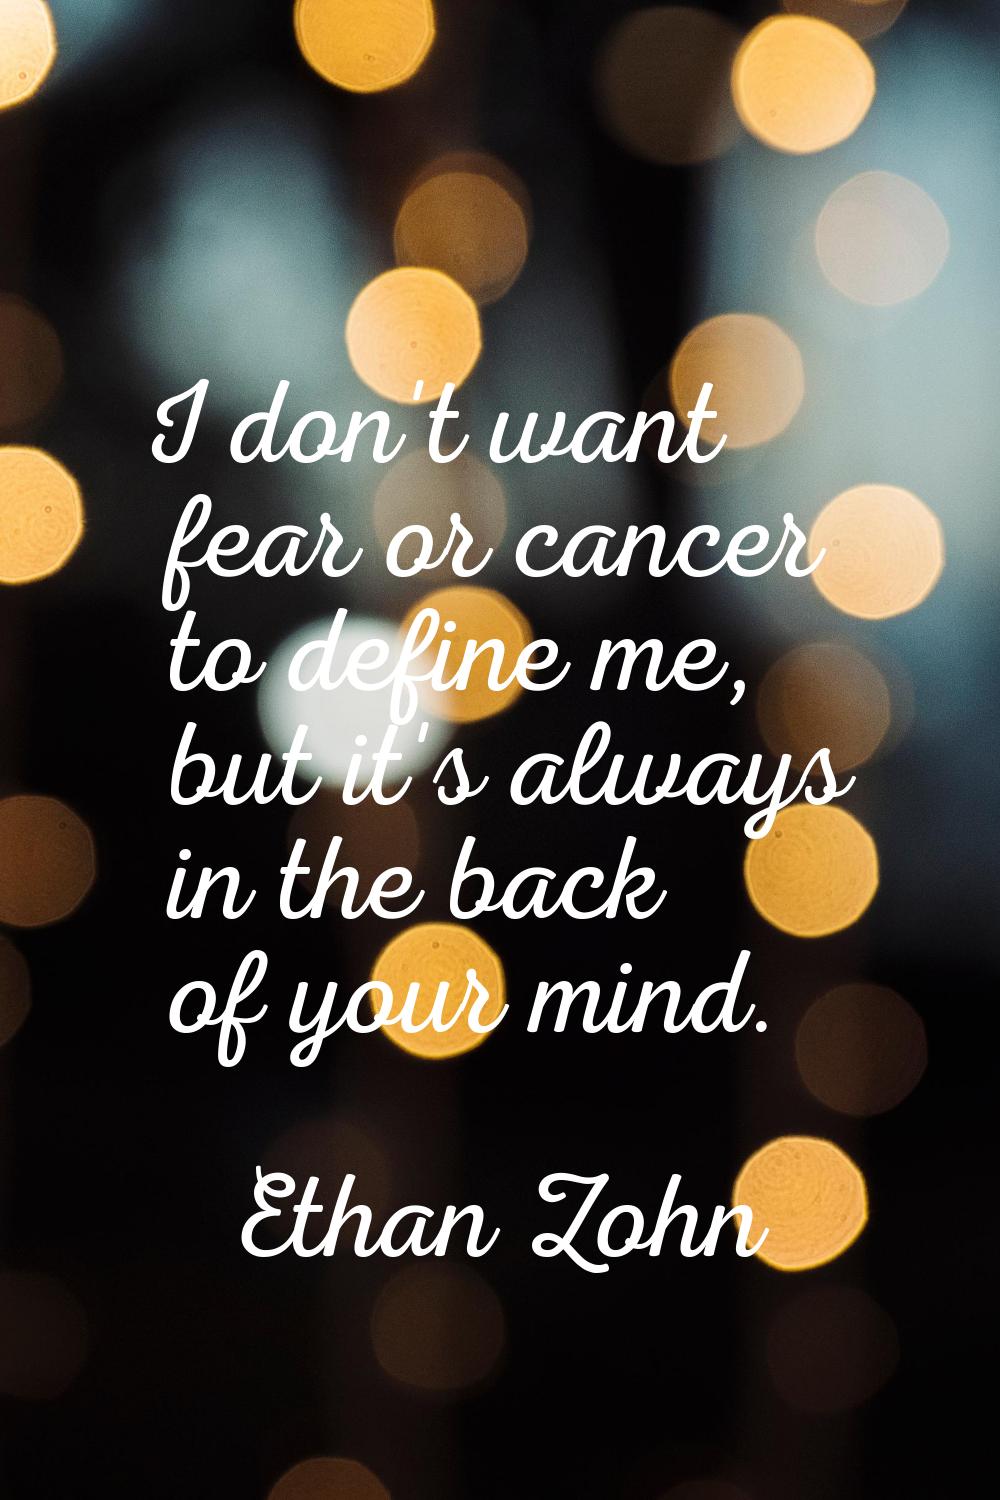 I don't want fear or cancer to define me, but it's always in the back of your mind.